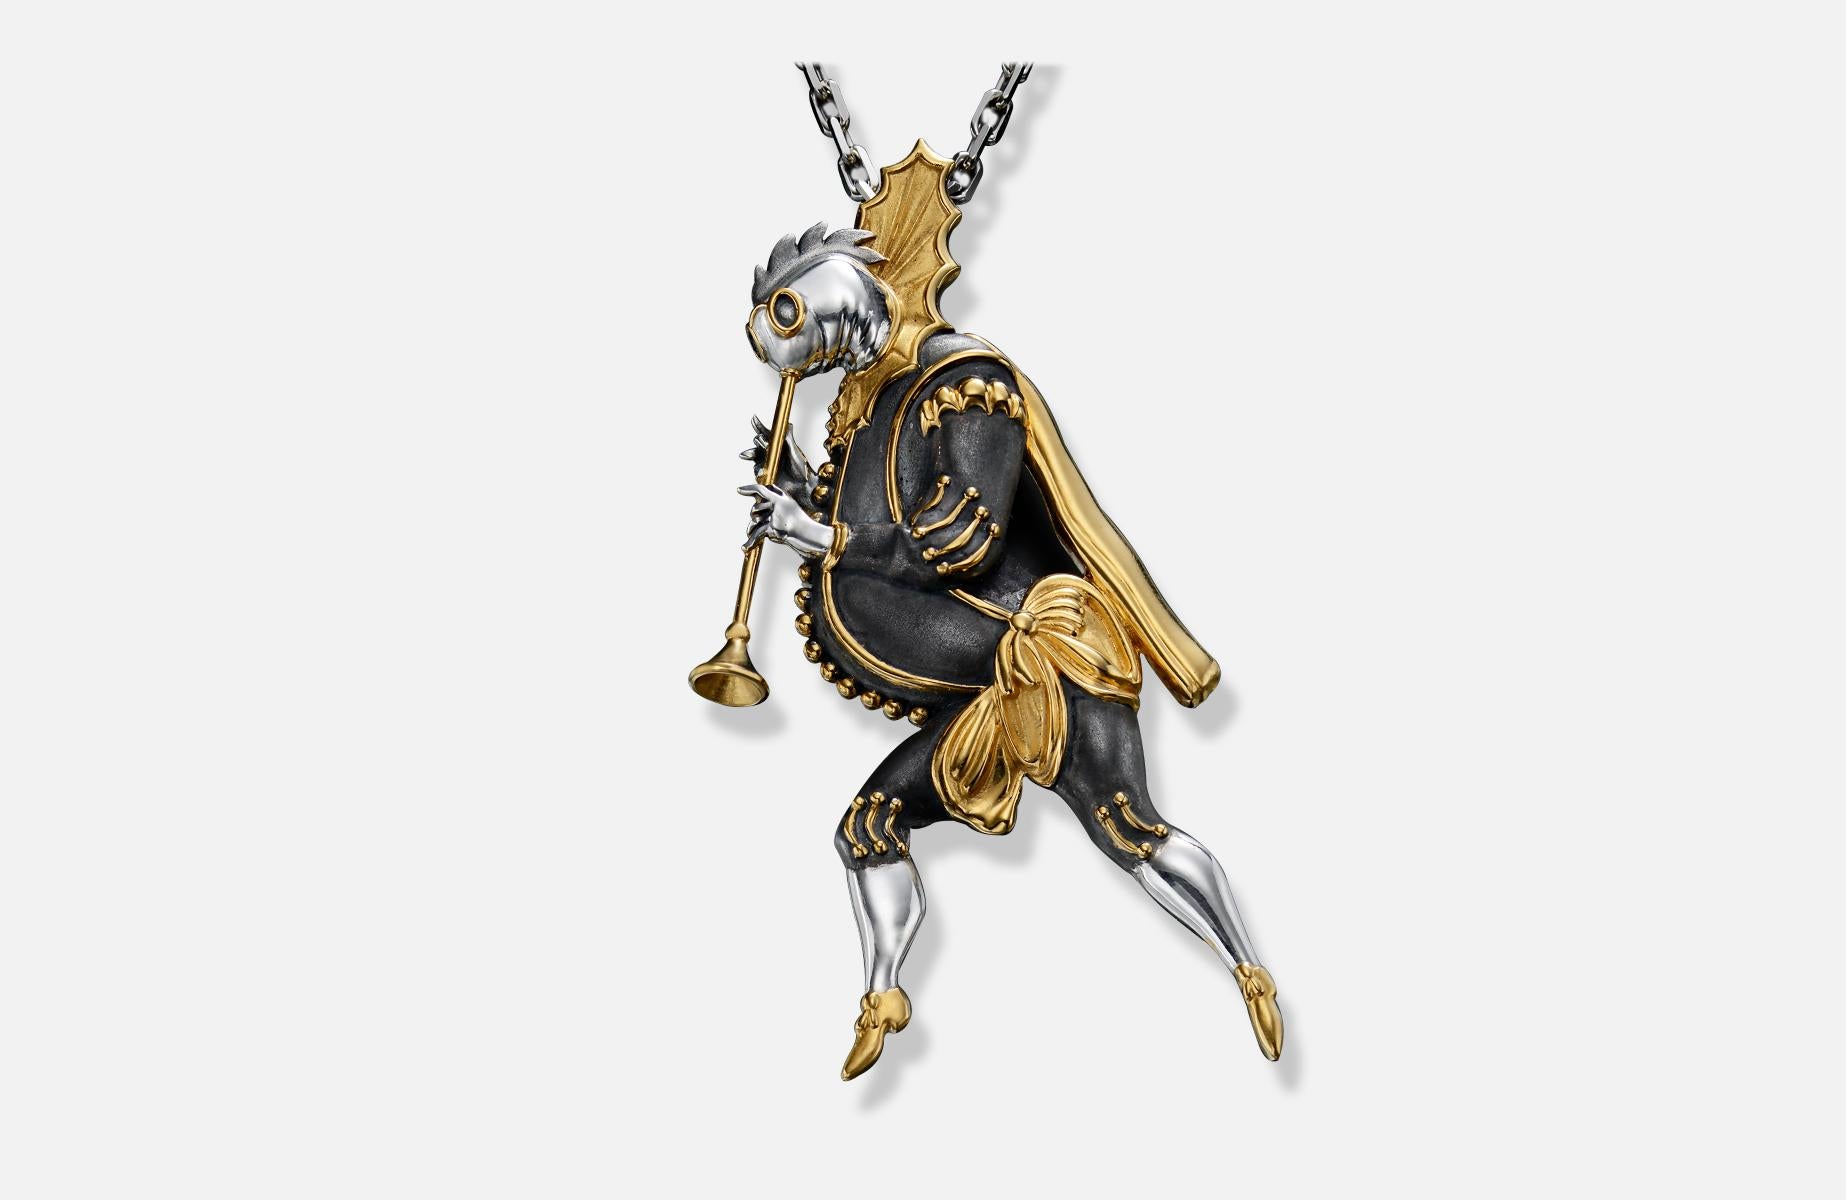 Brooch - Pendant The Aquatic Trumpeter. Bestiary series.
Gilded silver 22k brooch pendant with 24k gold plating
Pin 14k white gold 0.5 gr

Inspired by the costume design that Chemiakin undertook for the Mariinsky Theatre’s productions of the ballet